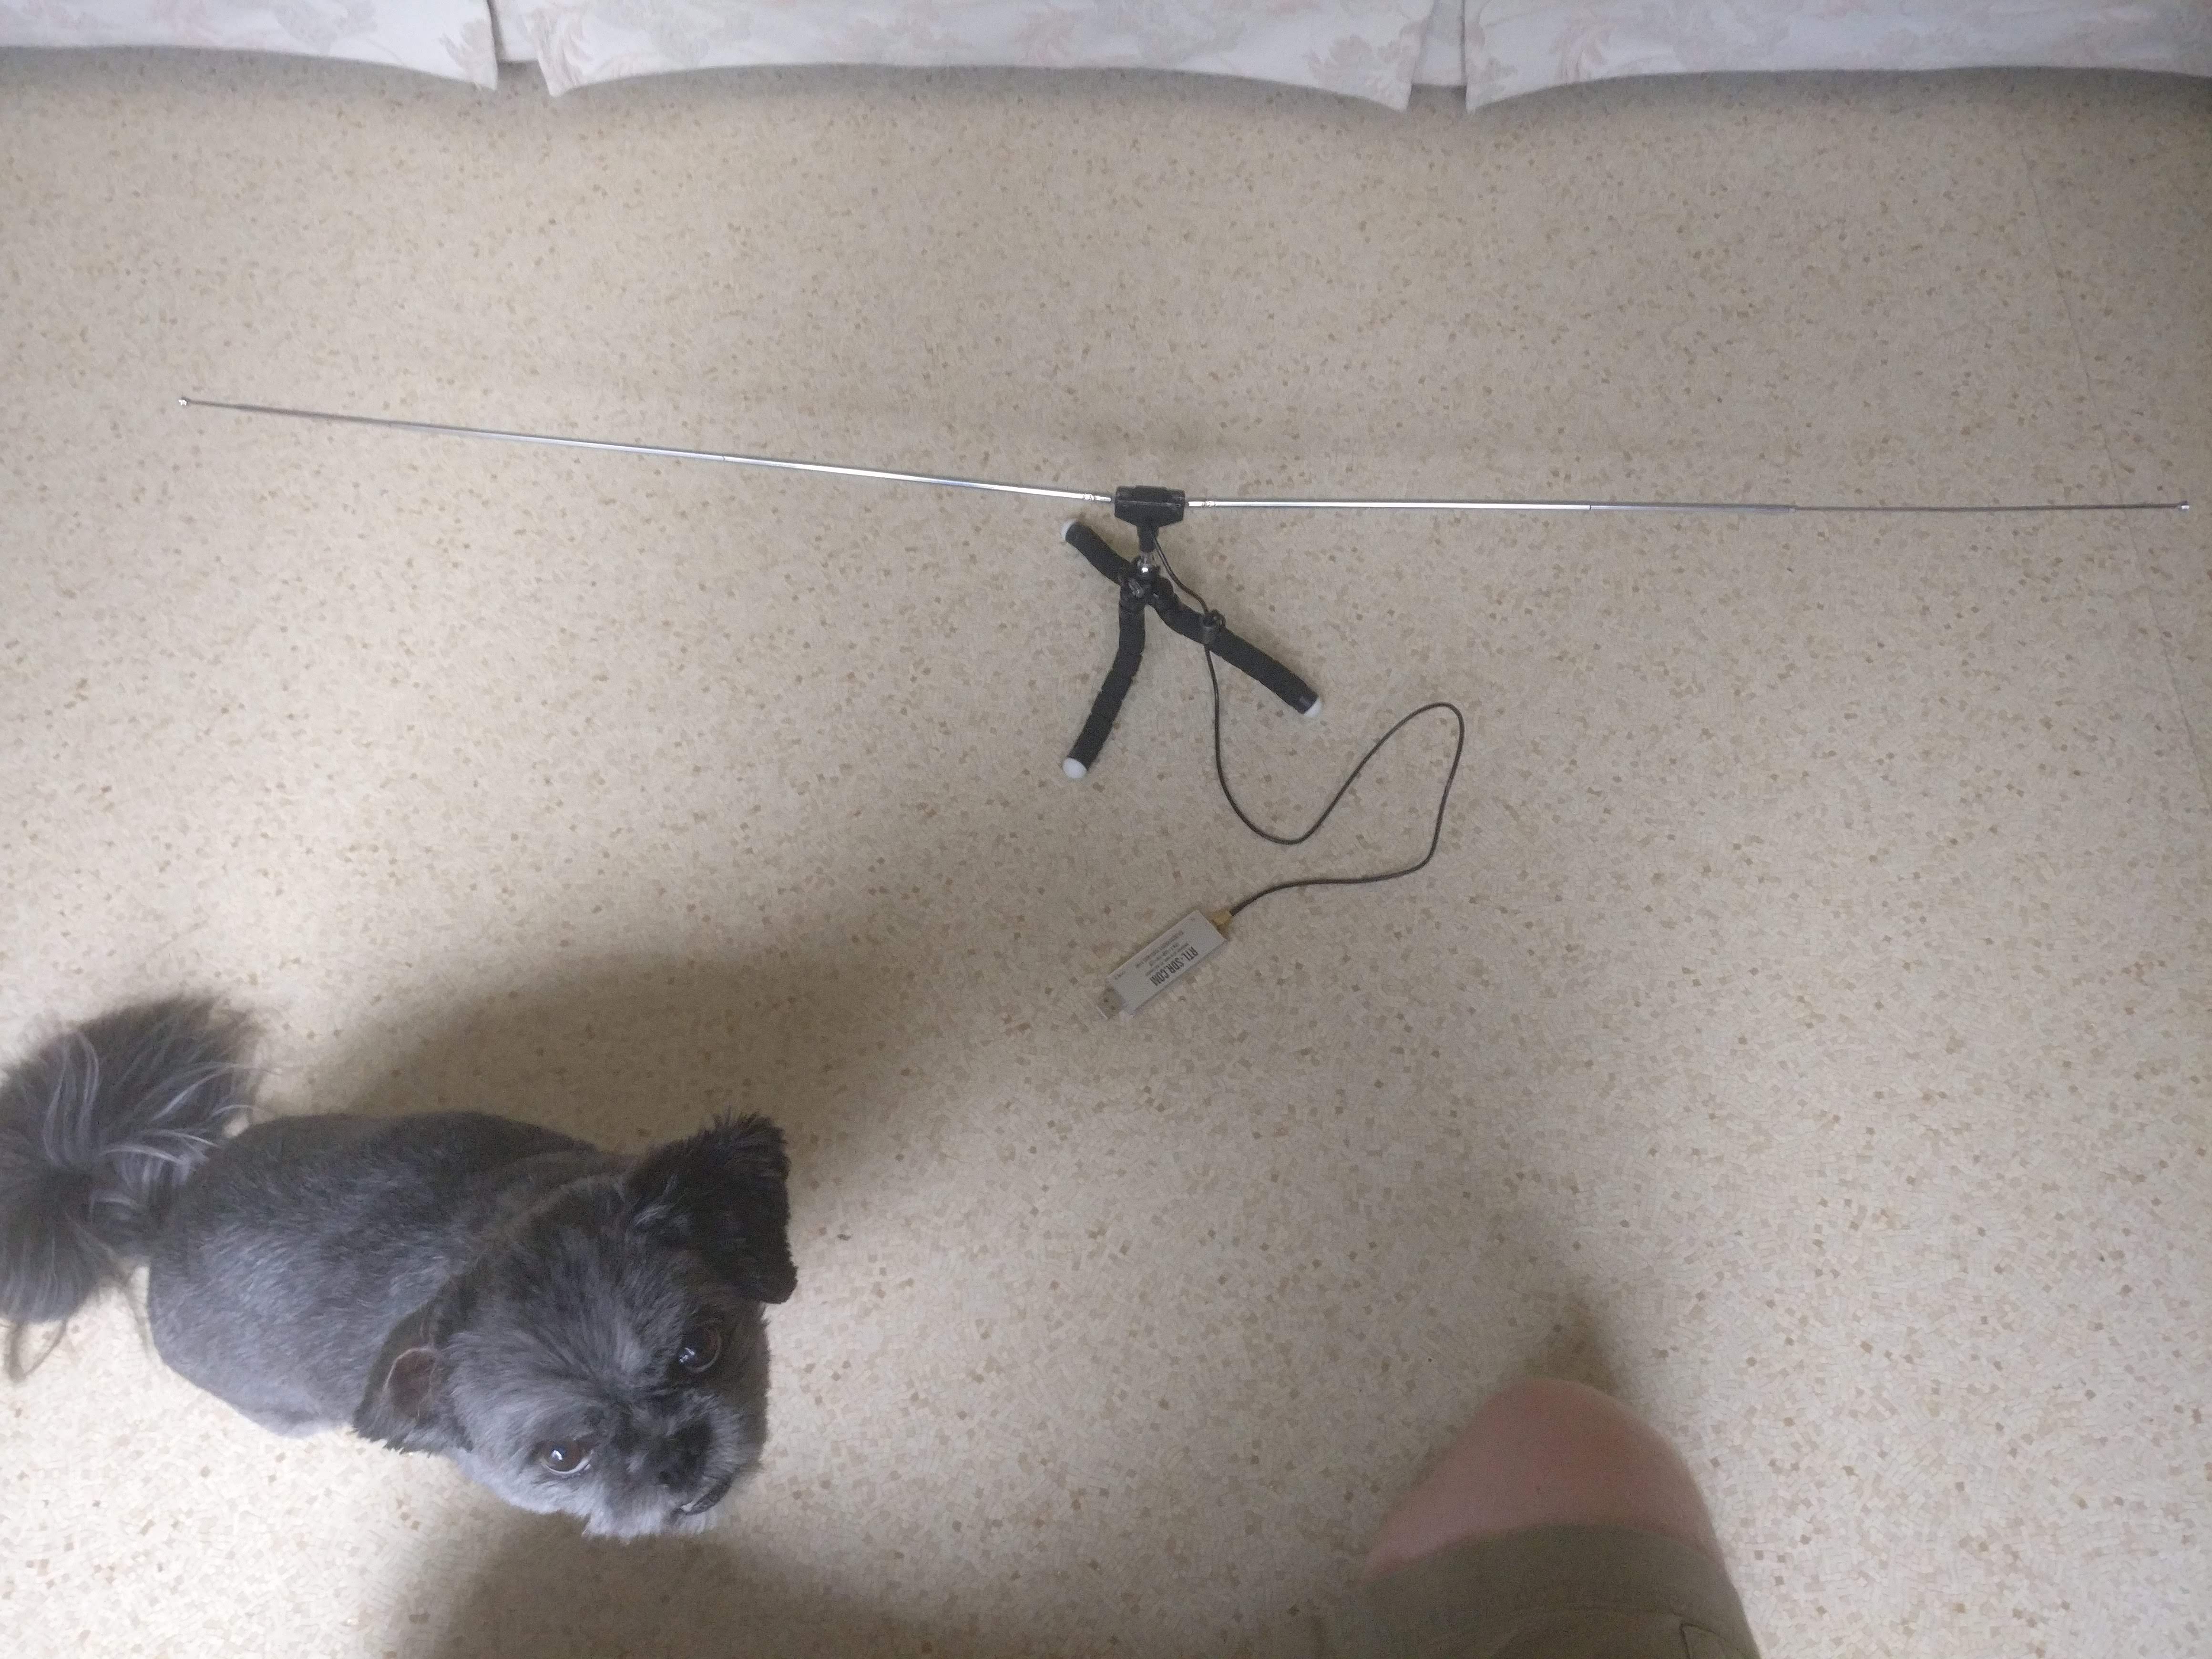 extended bunny ears as dipole antenna with dog